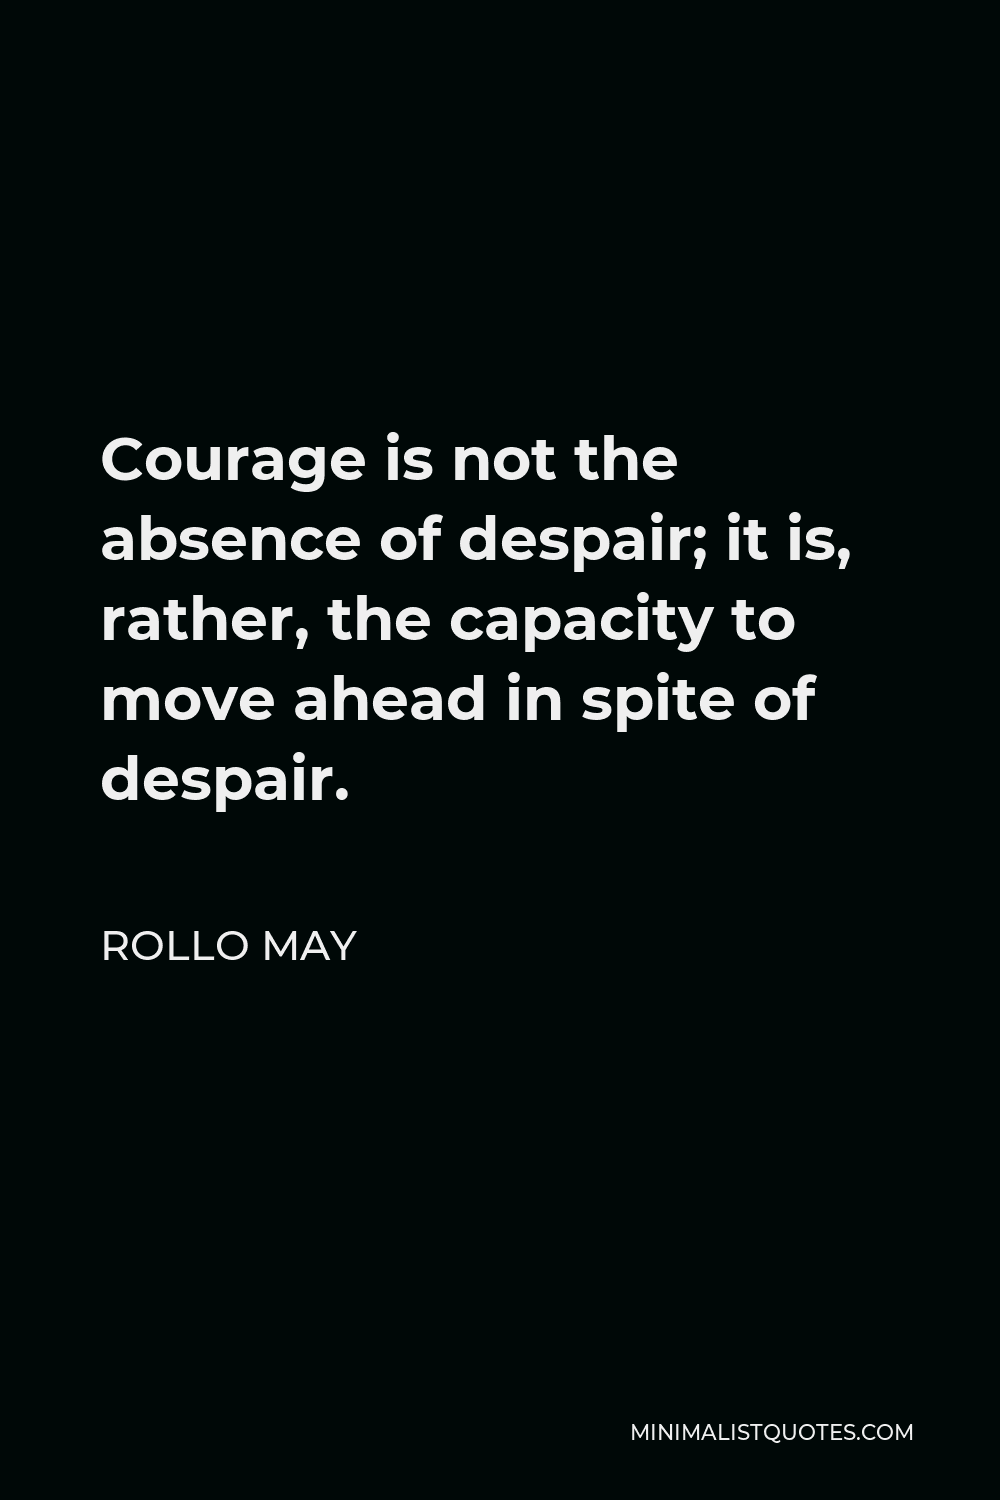 Rollo May Quote - Courage is not the absence of despair; it is, rather, the capacity to move ahead in spite of despair.